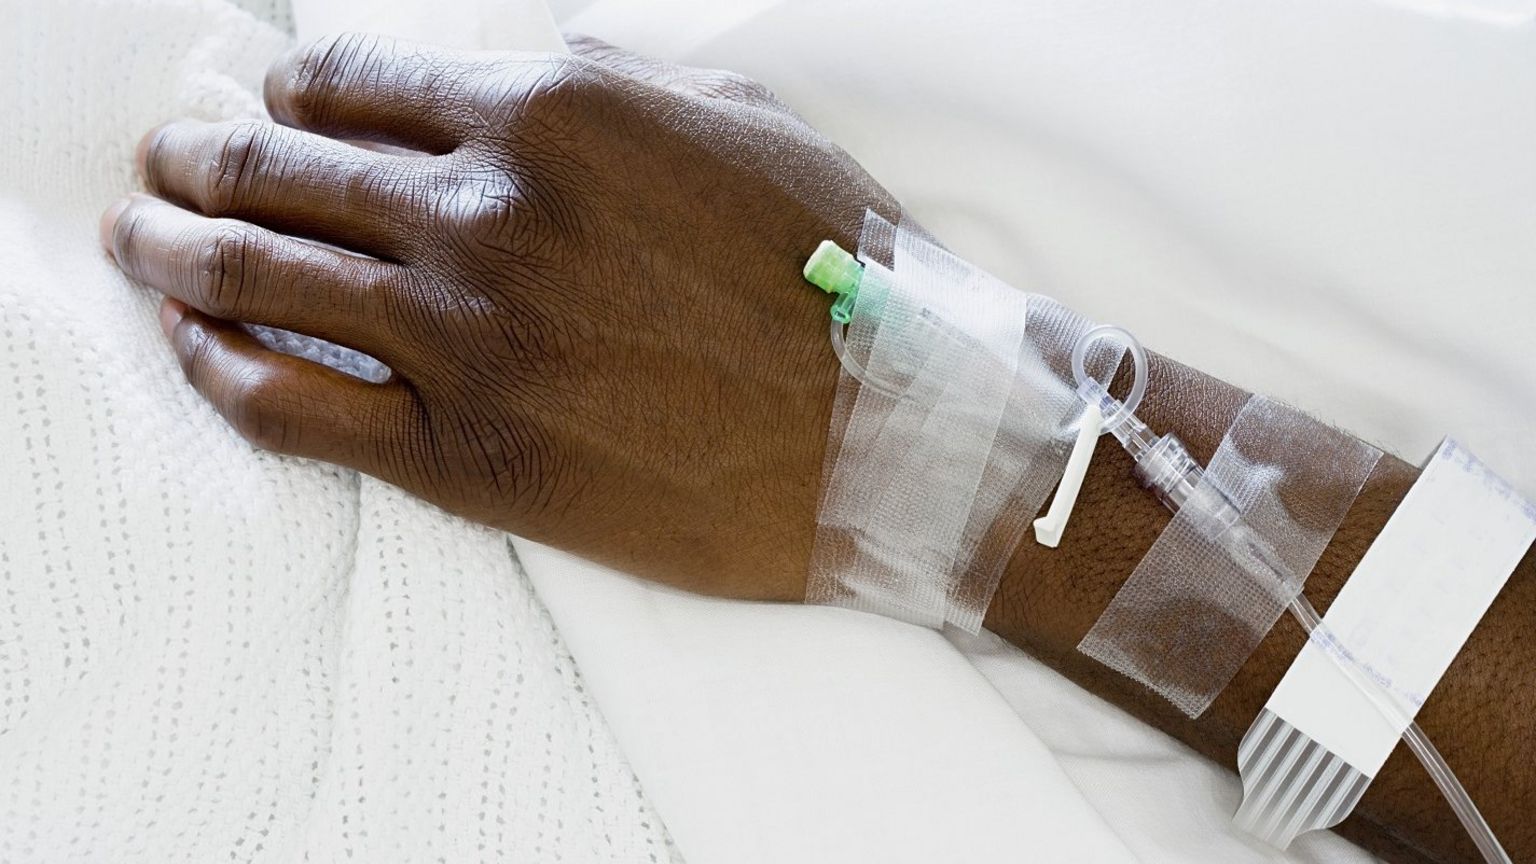 File photo: Black arm with IV drip attached